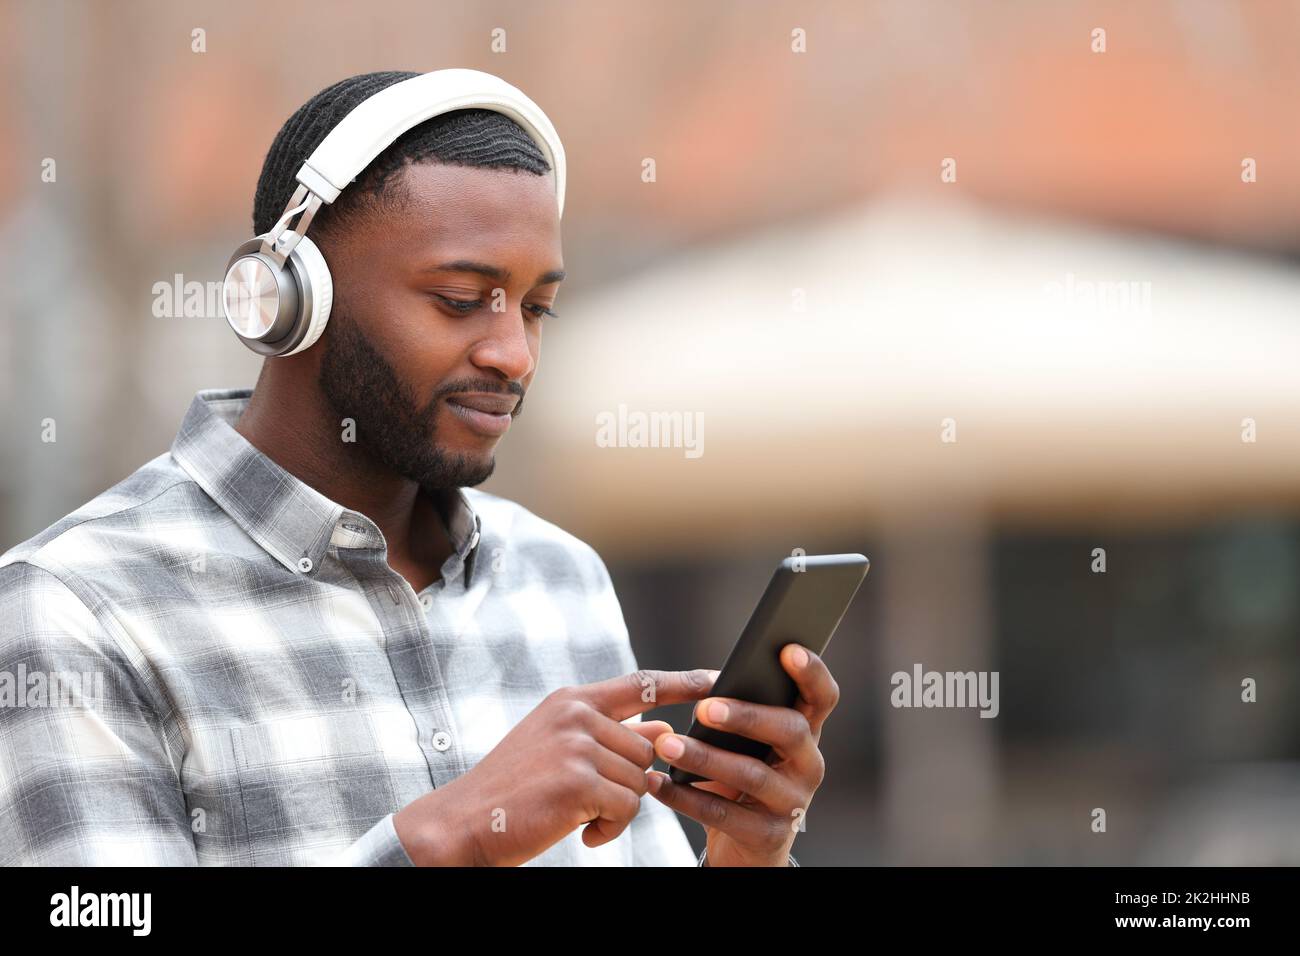 Man with black skin listening to music walks in the street Stock Photo